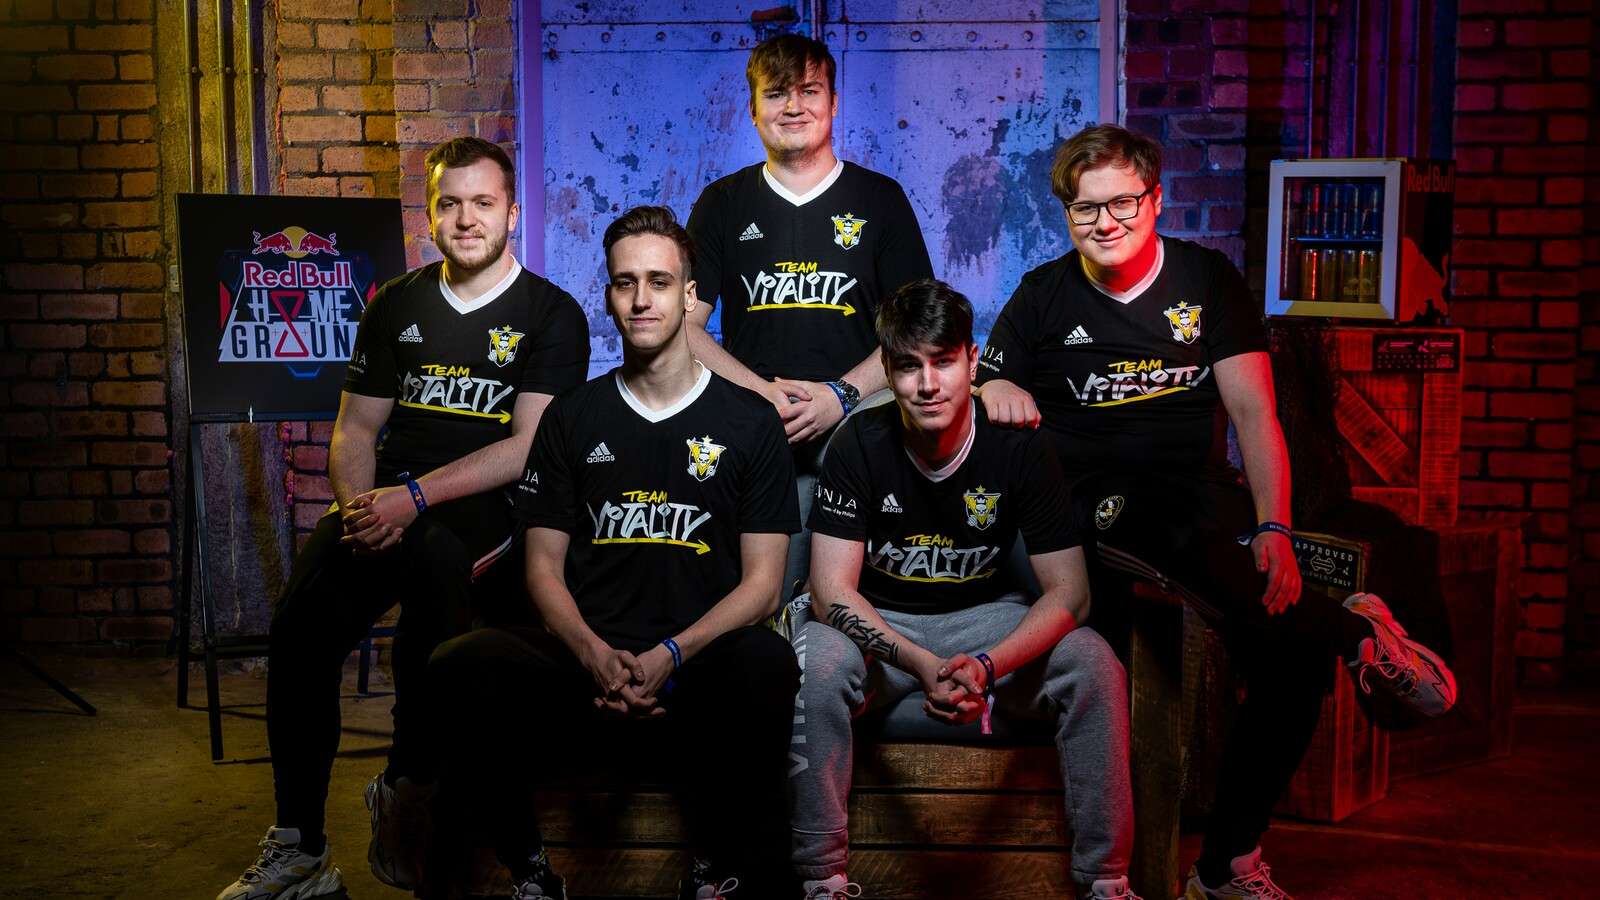 Team Vitality Valorant at Red Bull Home Ground